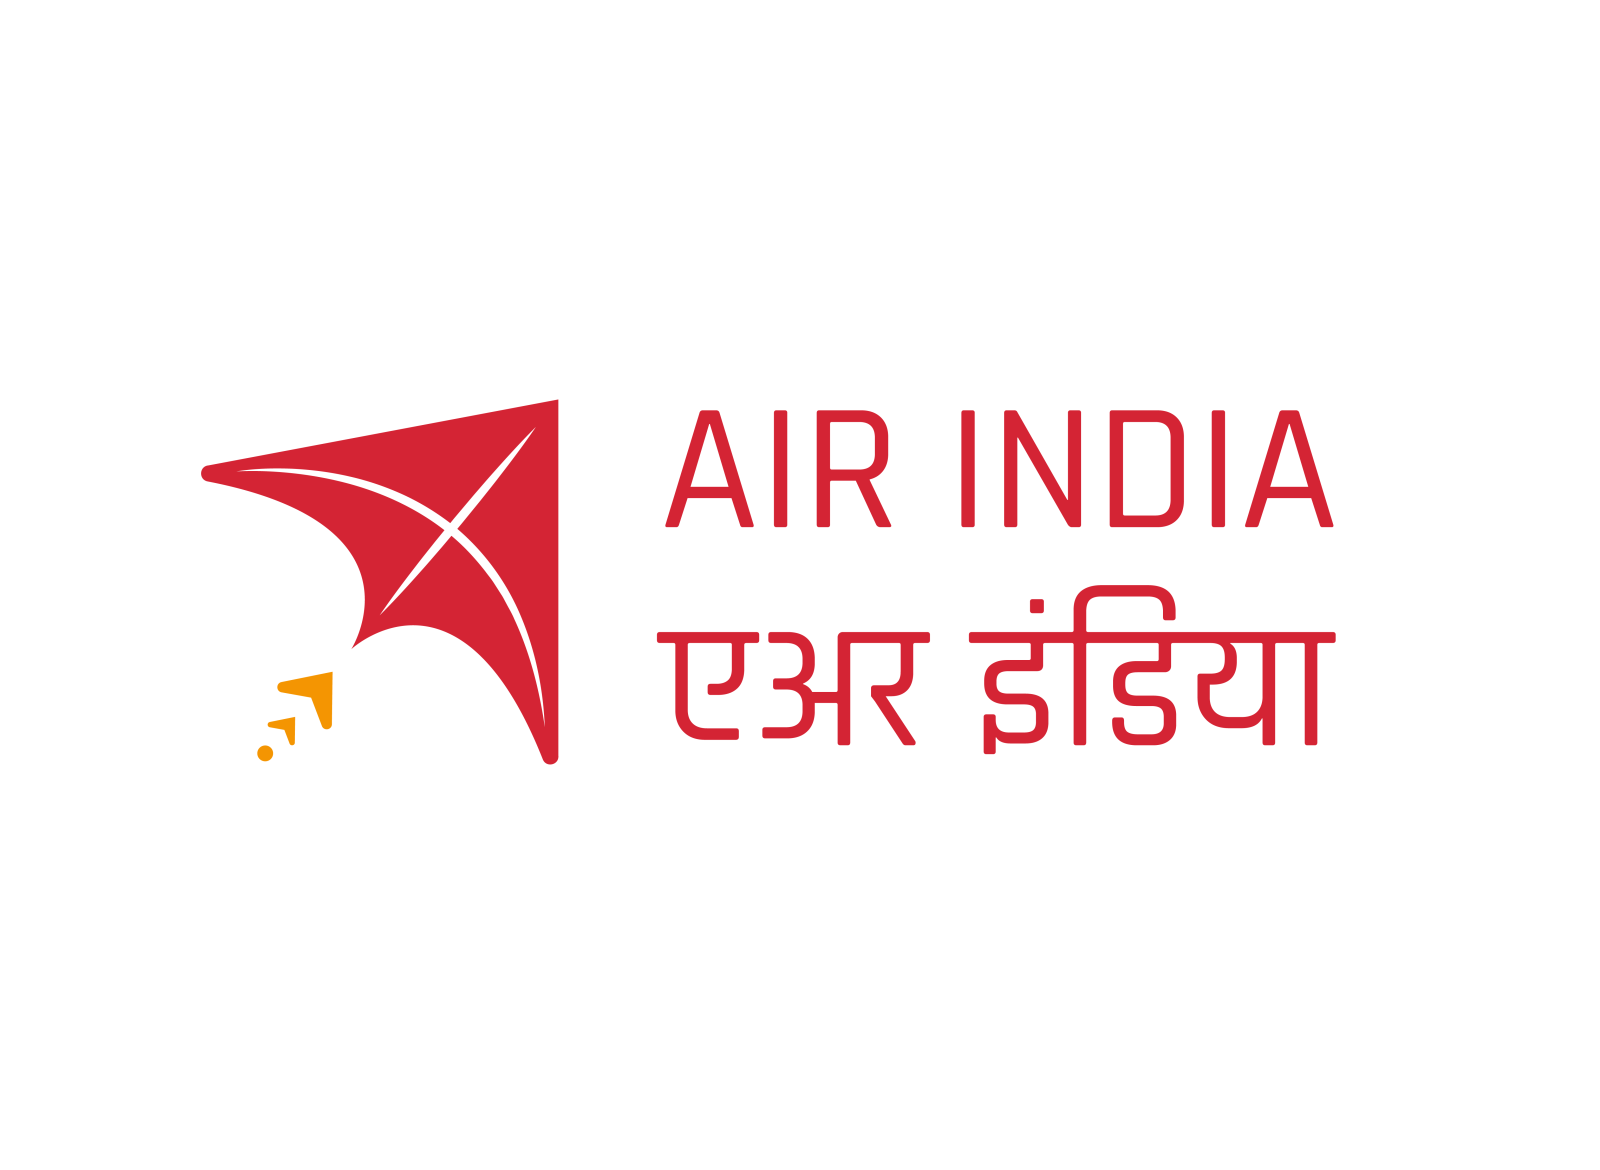 How to draw Air India logo old || AIR INDIA LOGO || Airline, airport -  YouTube